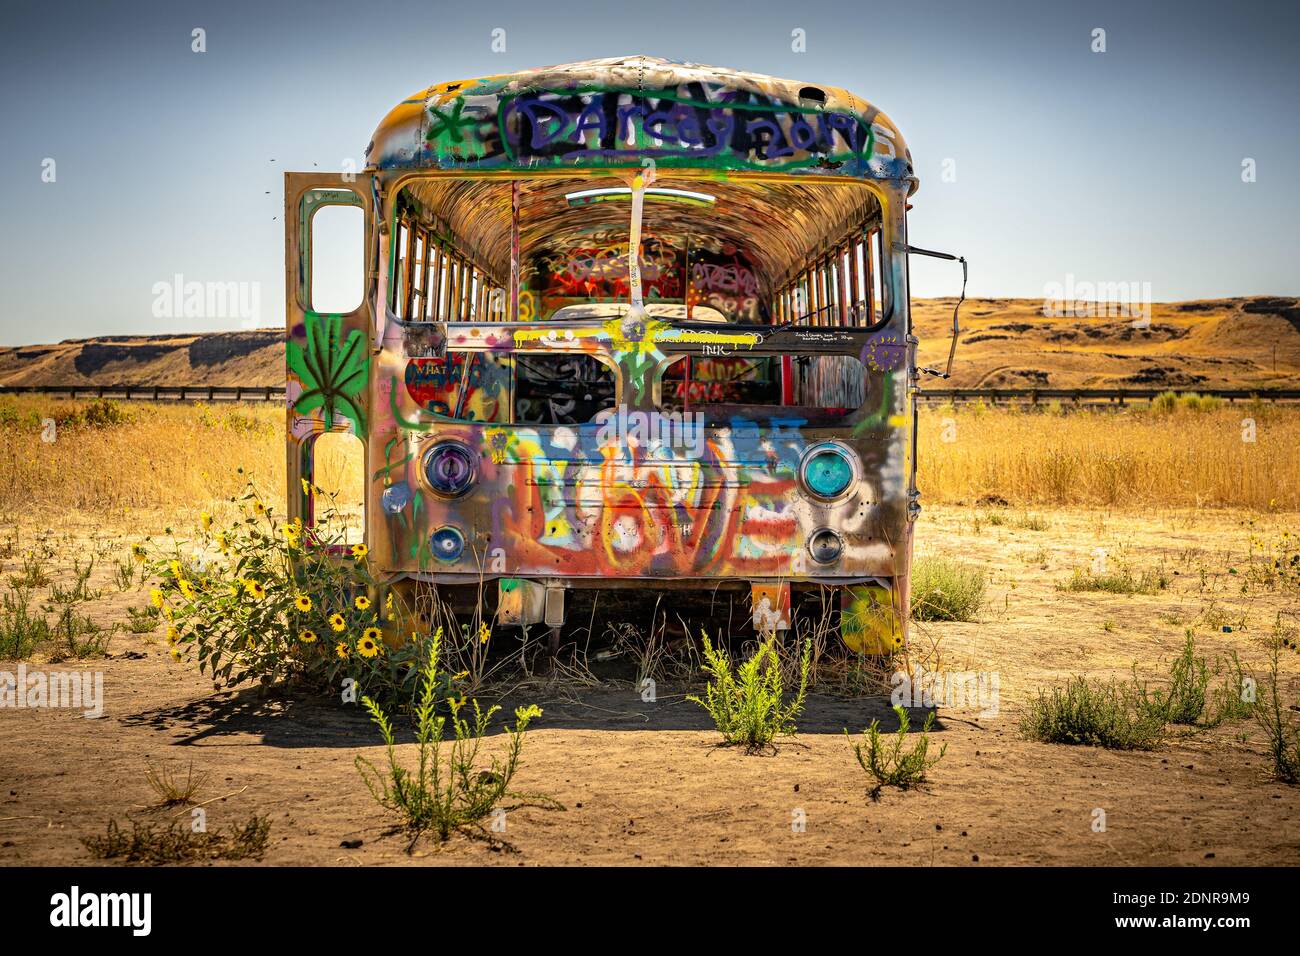 Abandoned bus covered in graffiti Stock Photo